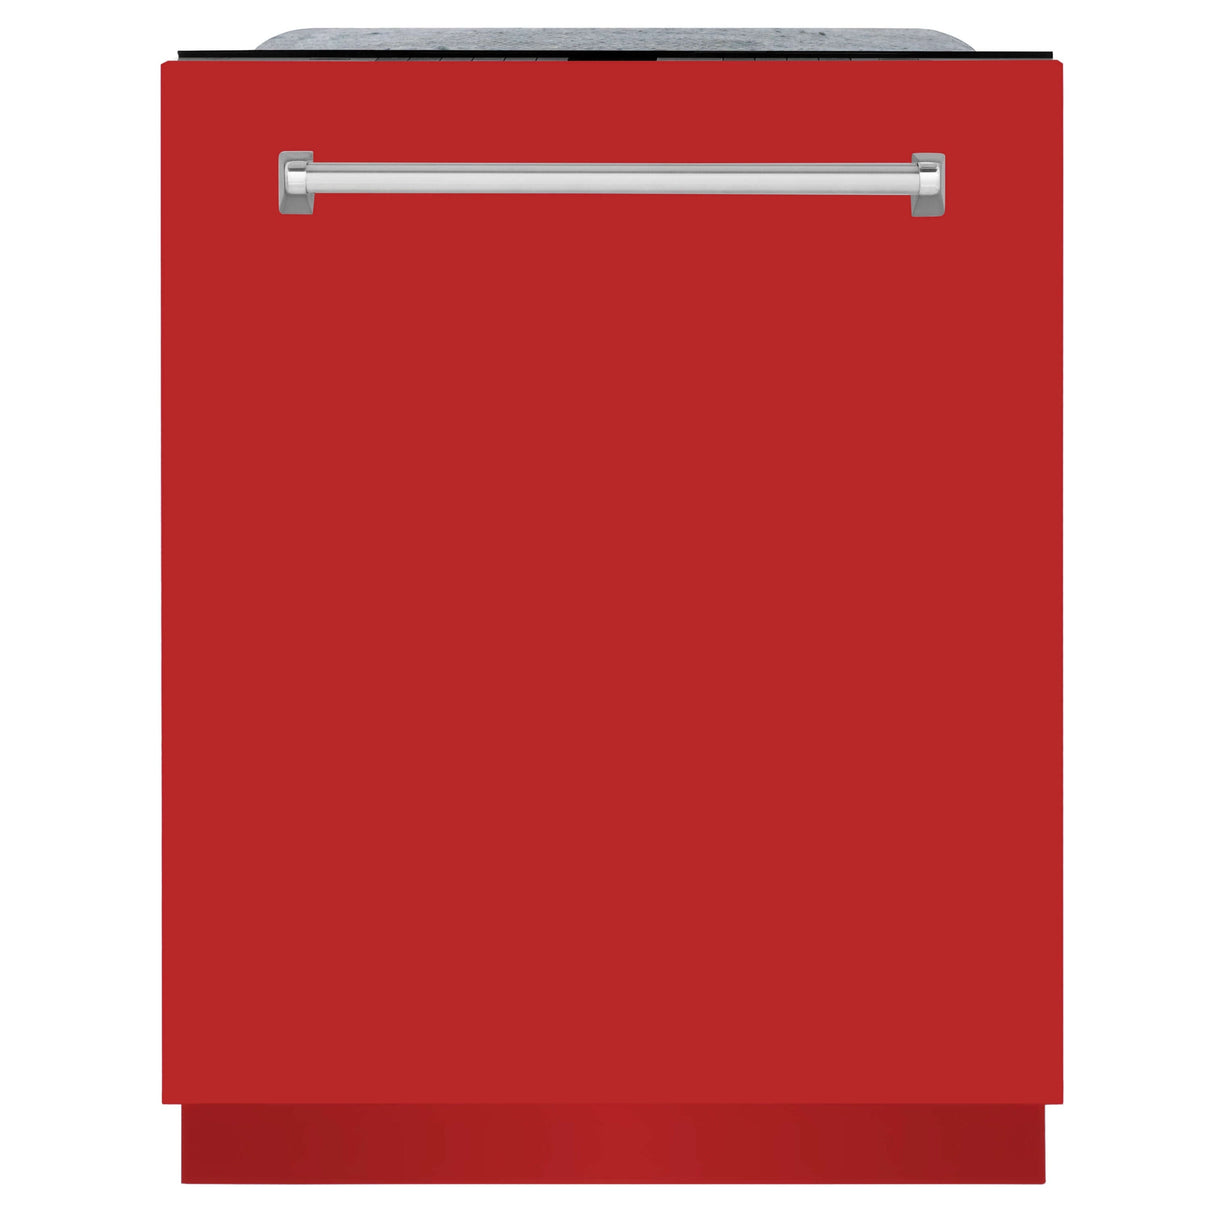 ZLINE 24 in. Monument Series 3rd Rack Top Touch Control Dishwasher with Red Matte Panel, 45dBa (DWMT-RM-24)